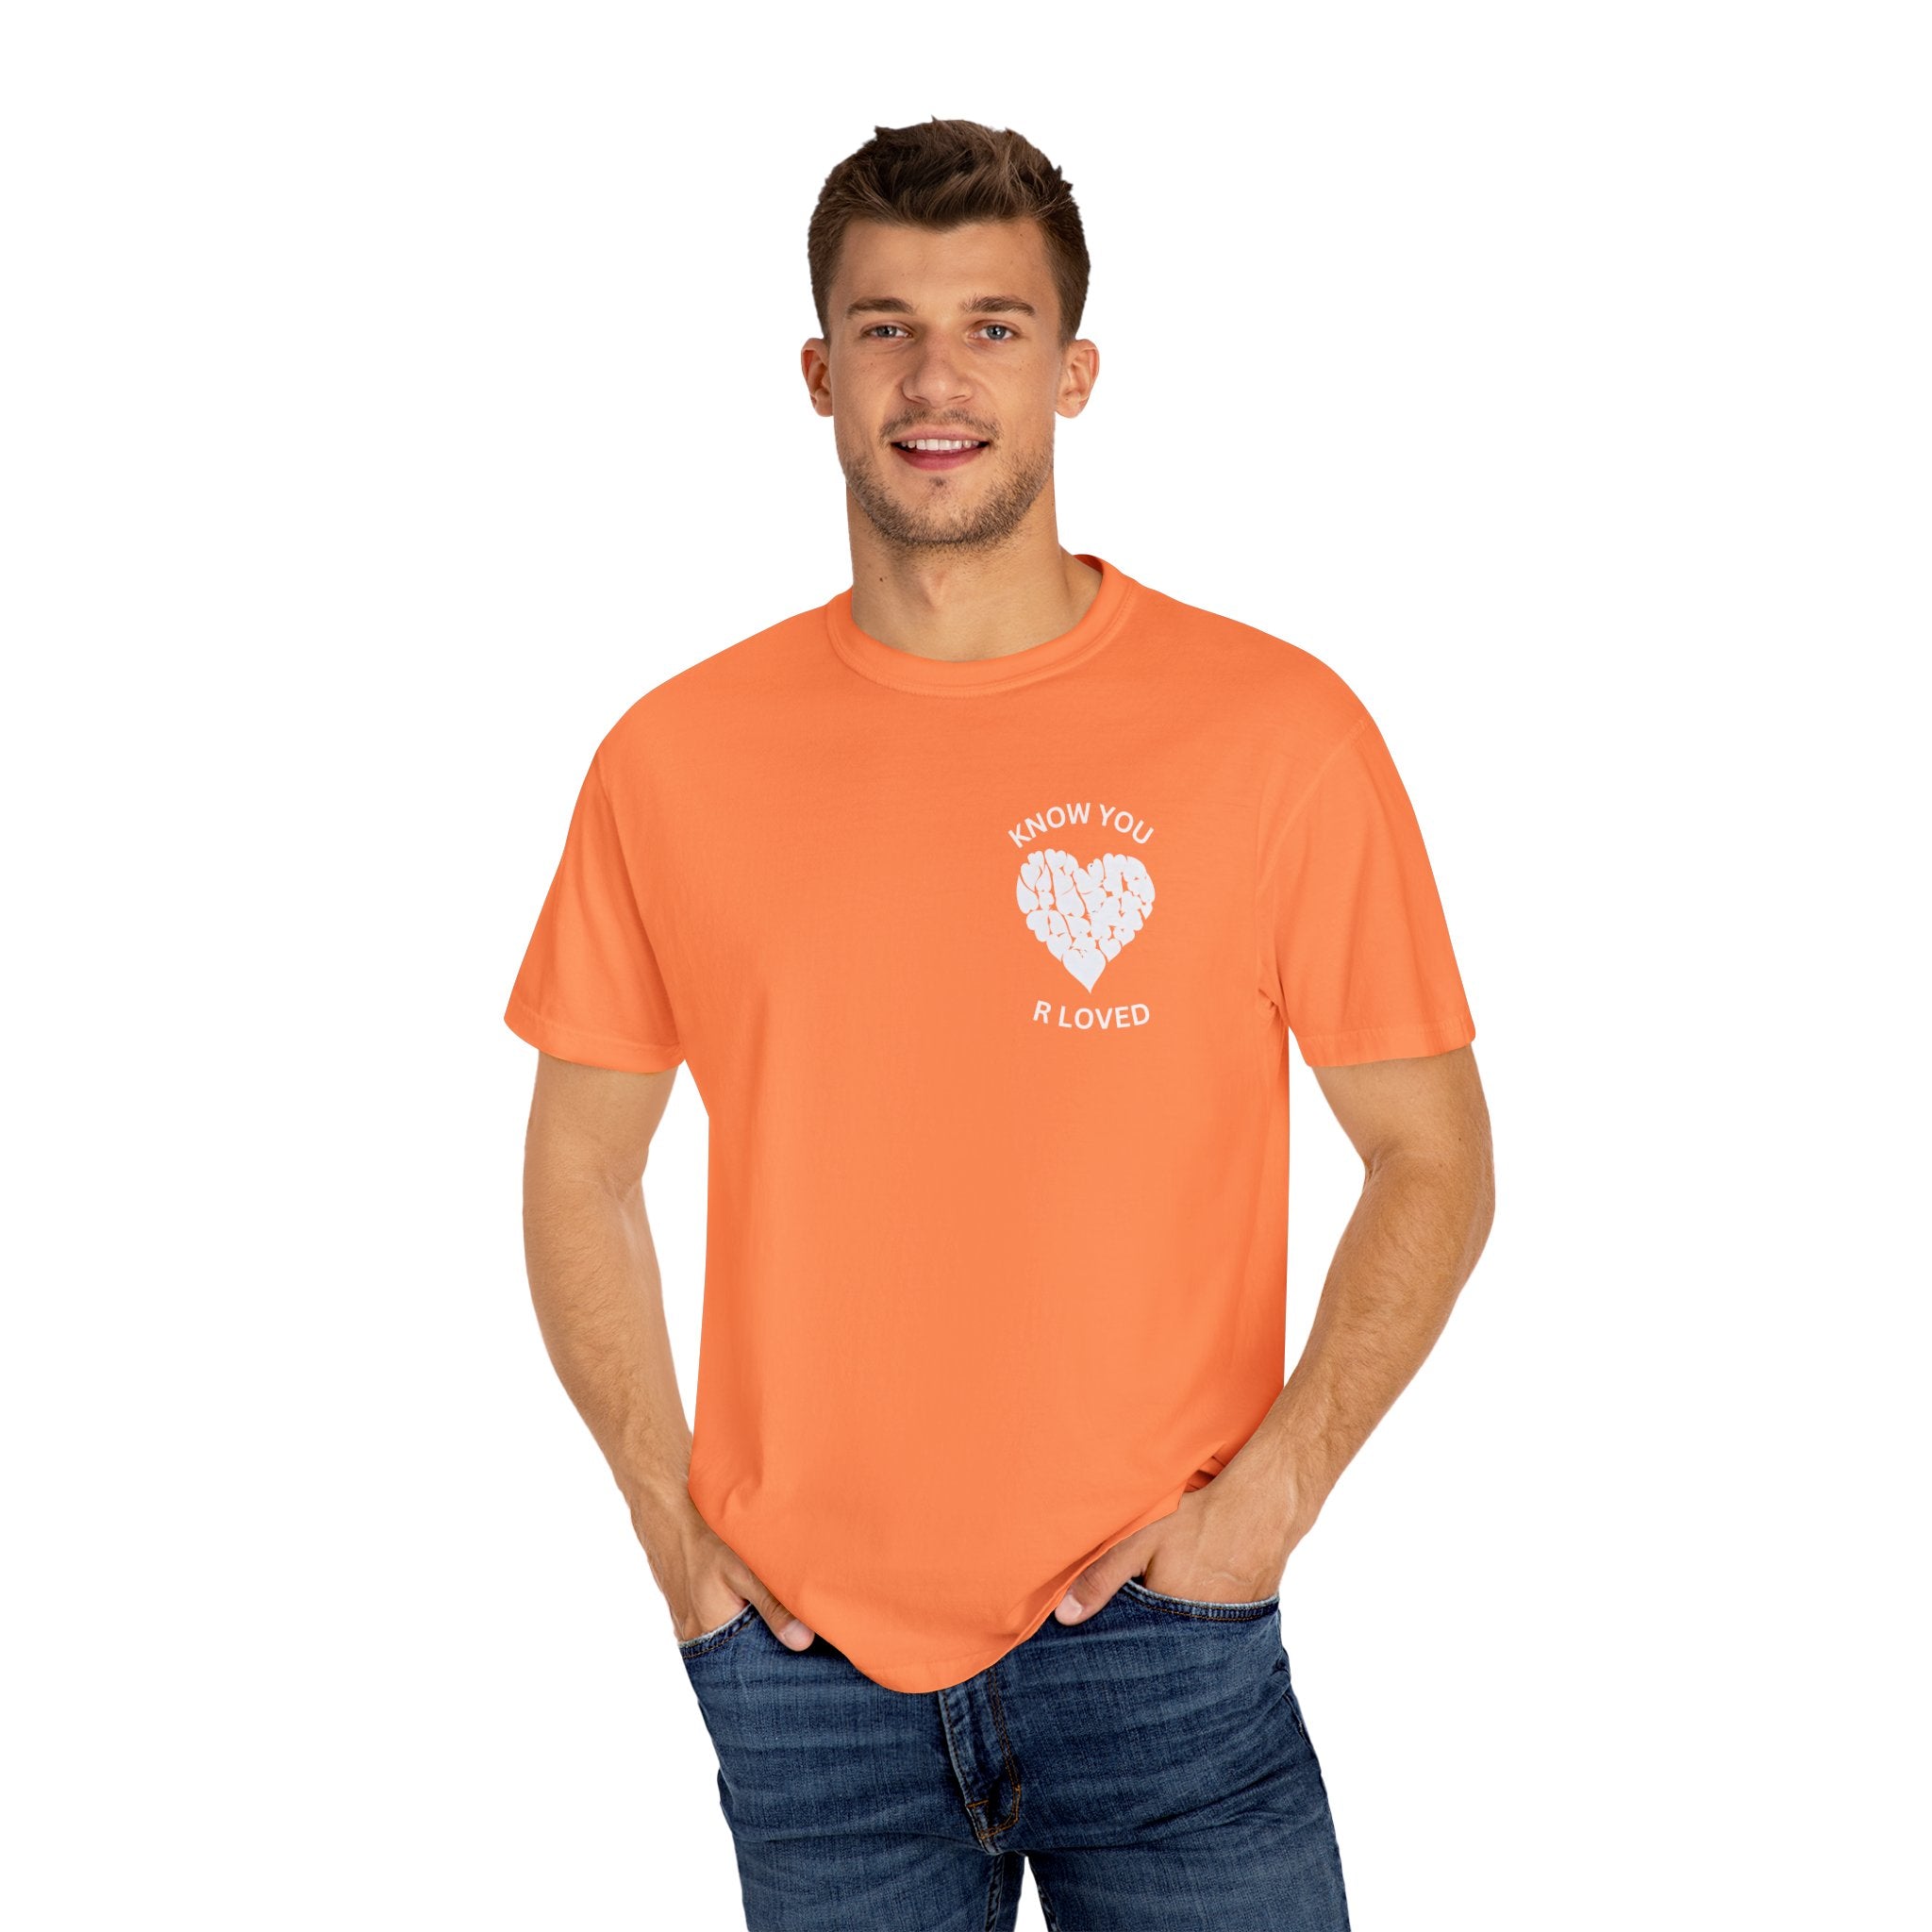 Know You Are Loved, Unisex T-Shirt